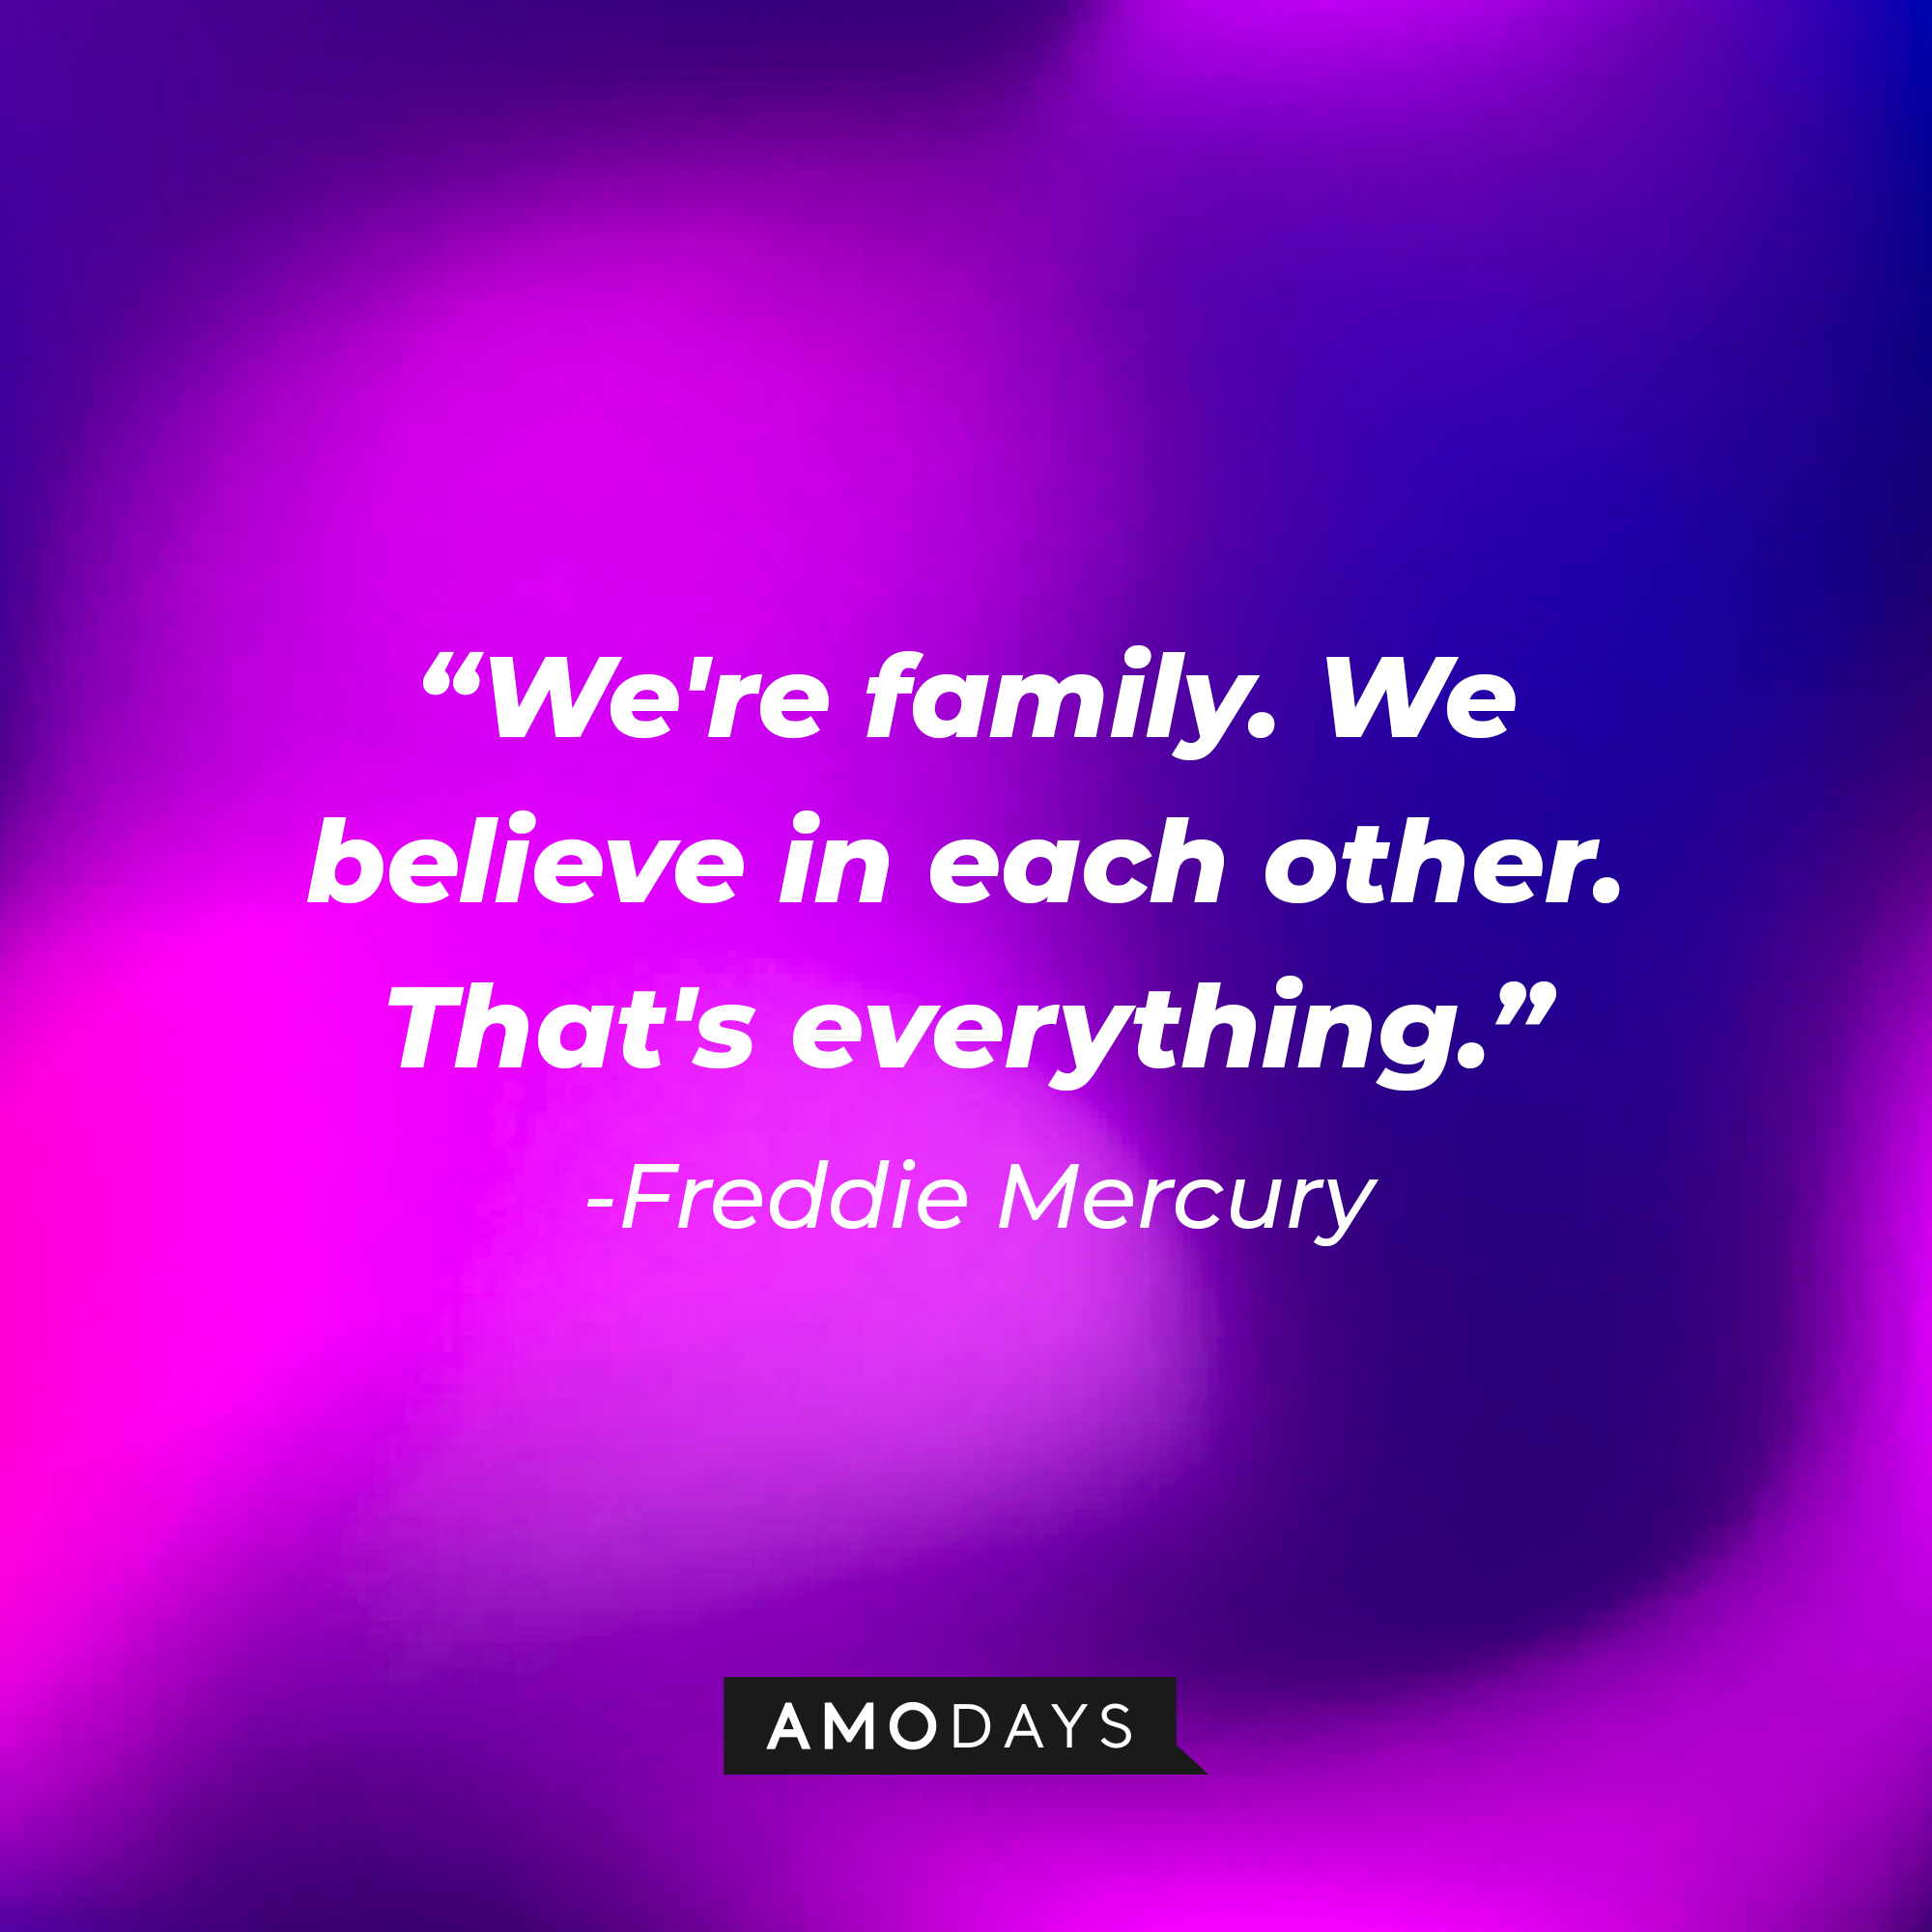 Freddie Mercury's quote: "We're family. We believe in each other. That's everything." | Image: Amodays